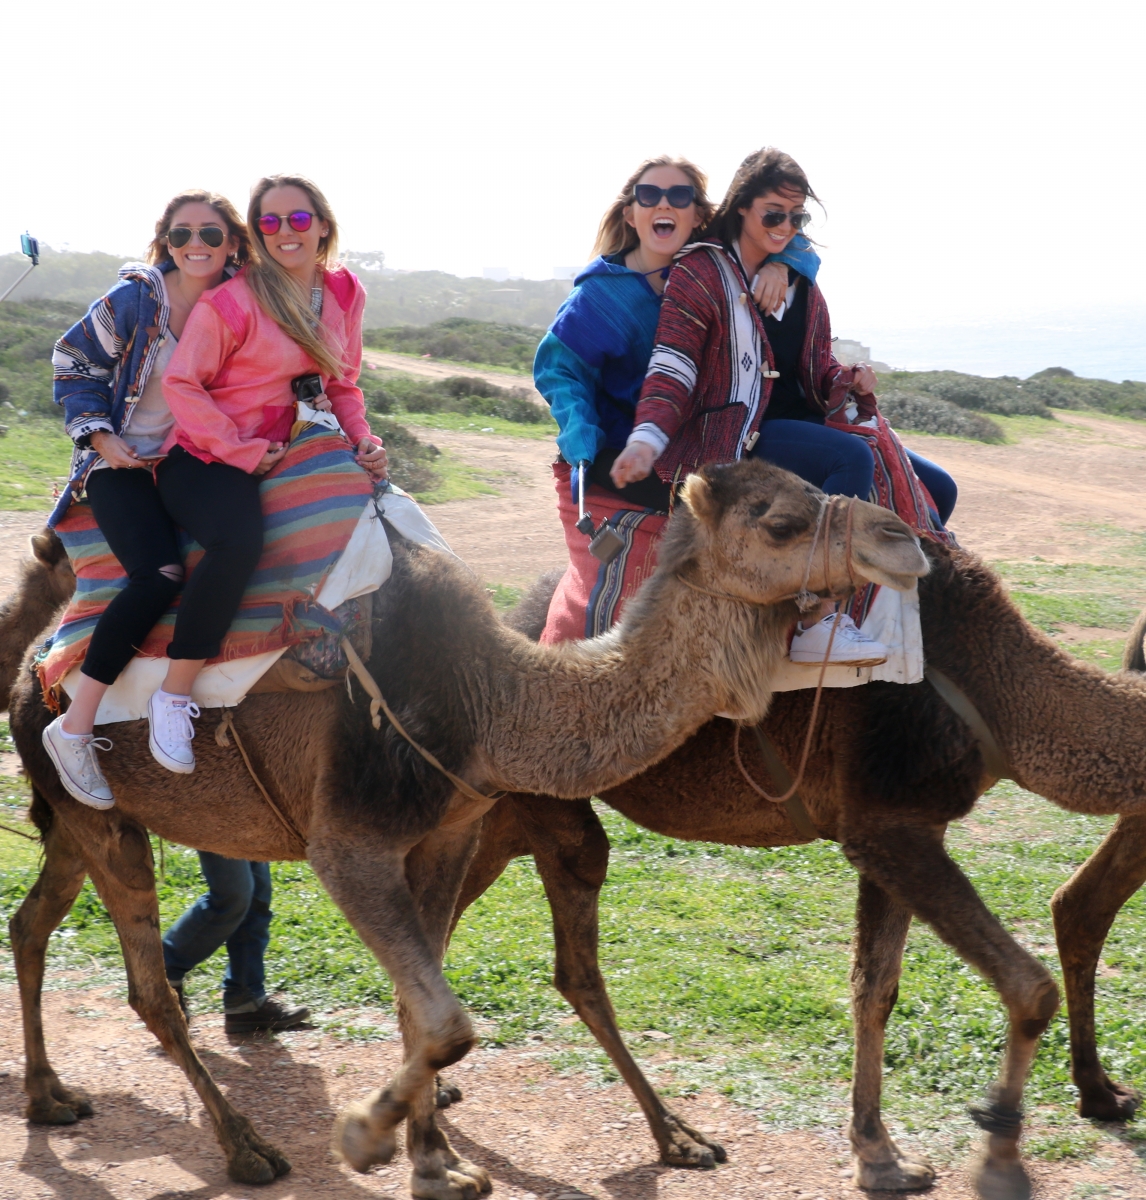 Niki, Ashley, Katie, and I riding camels in Tangier